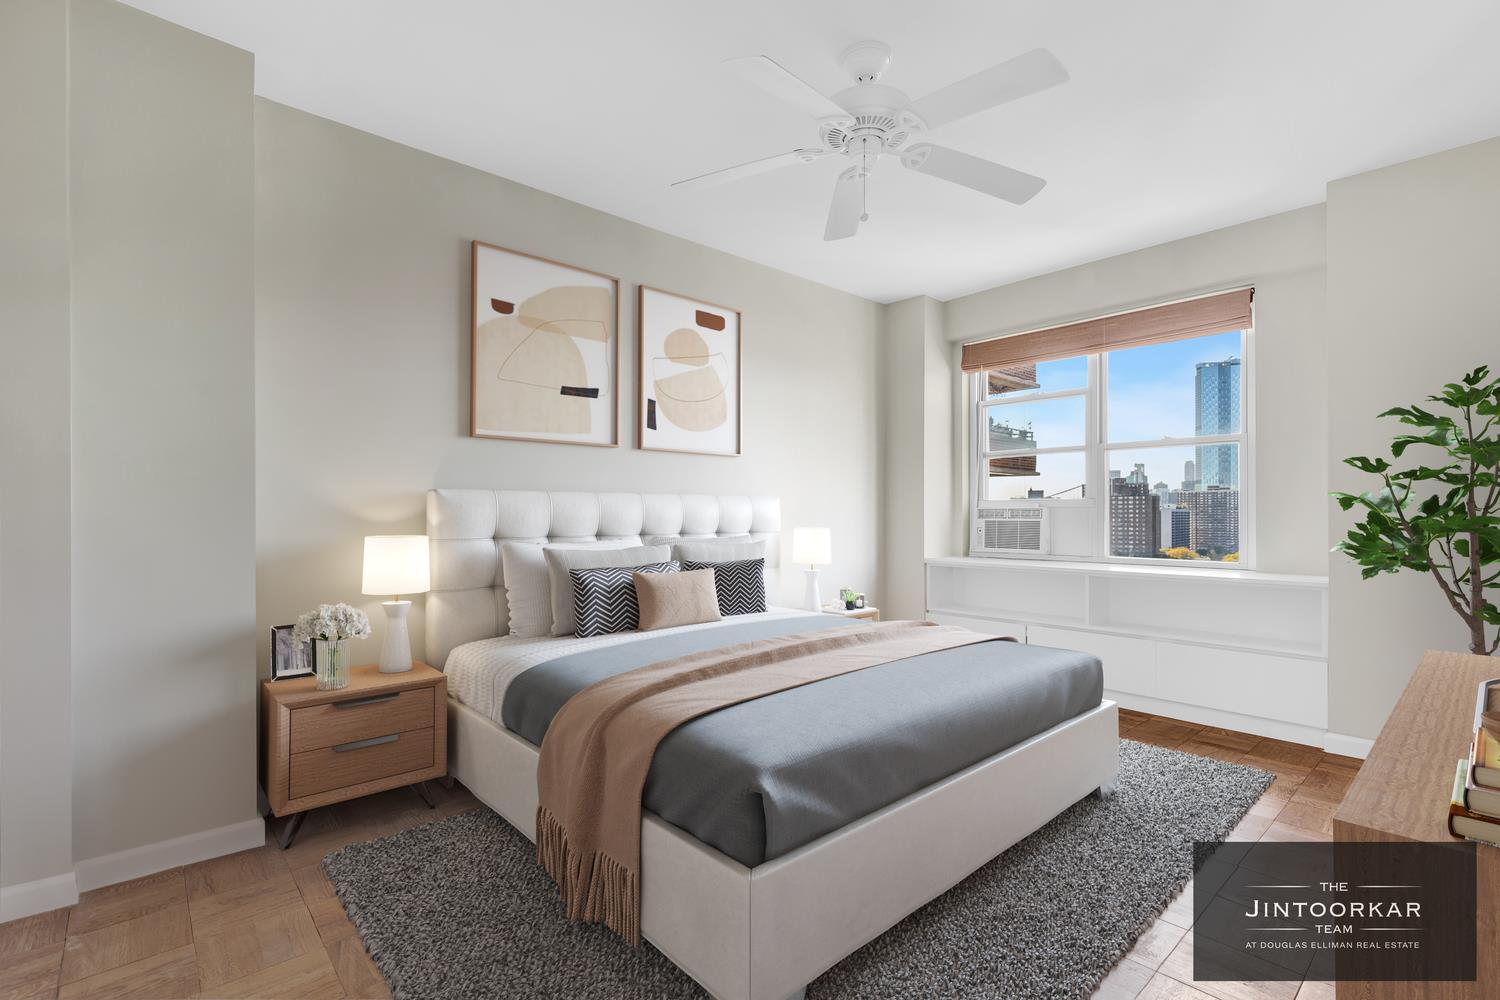 575 Grand Street 1605, Lower East Side, Downtown, NYC - 3 Bedrooms  
1.5 Bathrooms  
6 Rooms - 